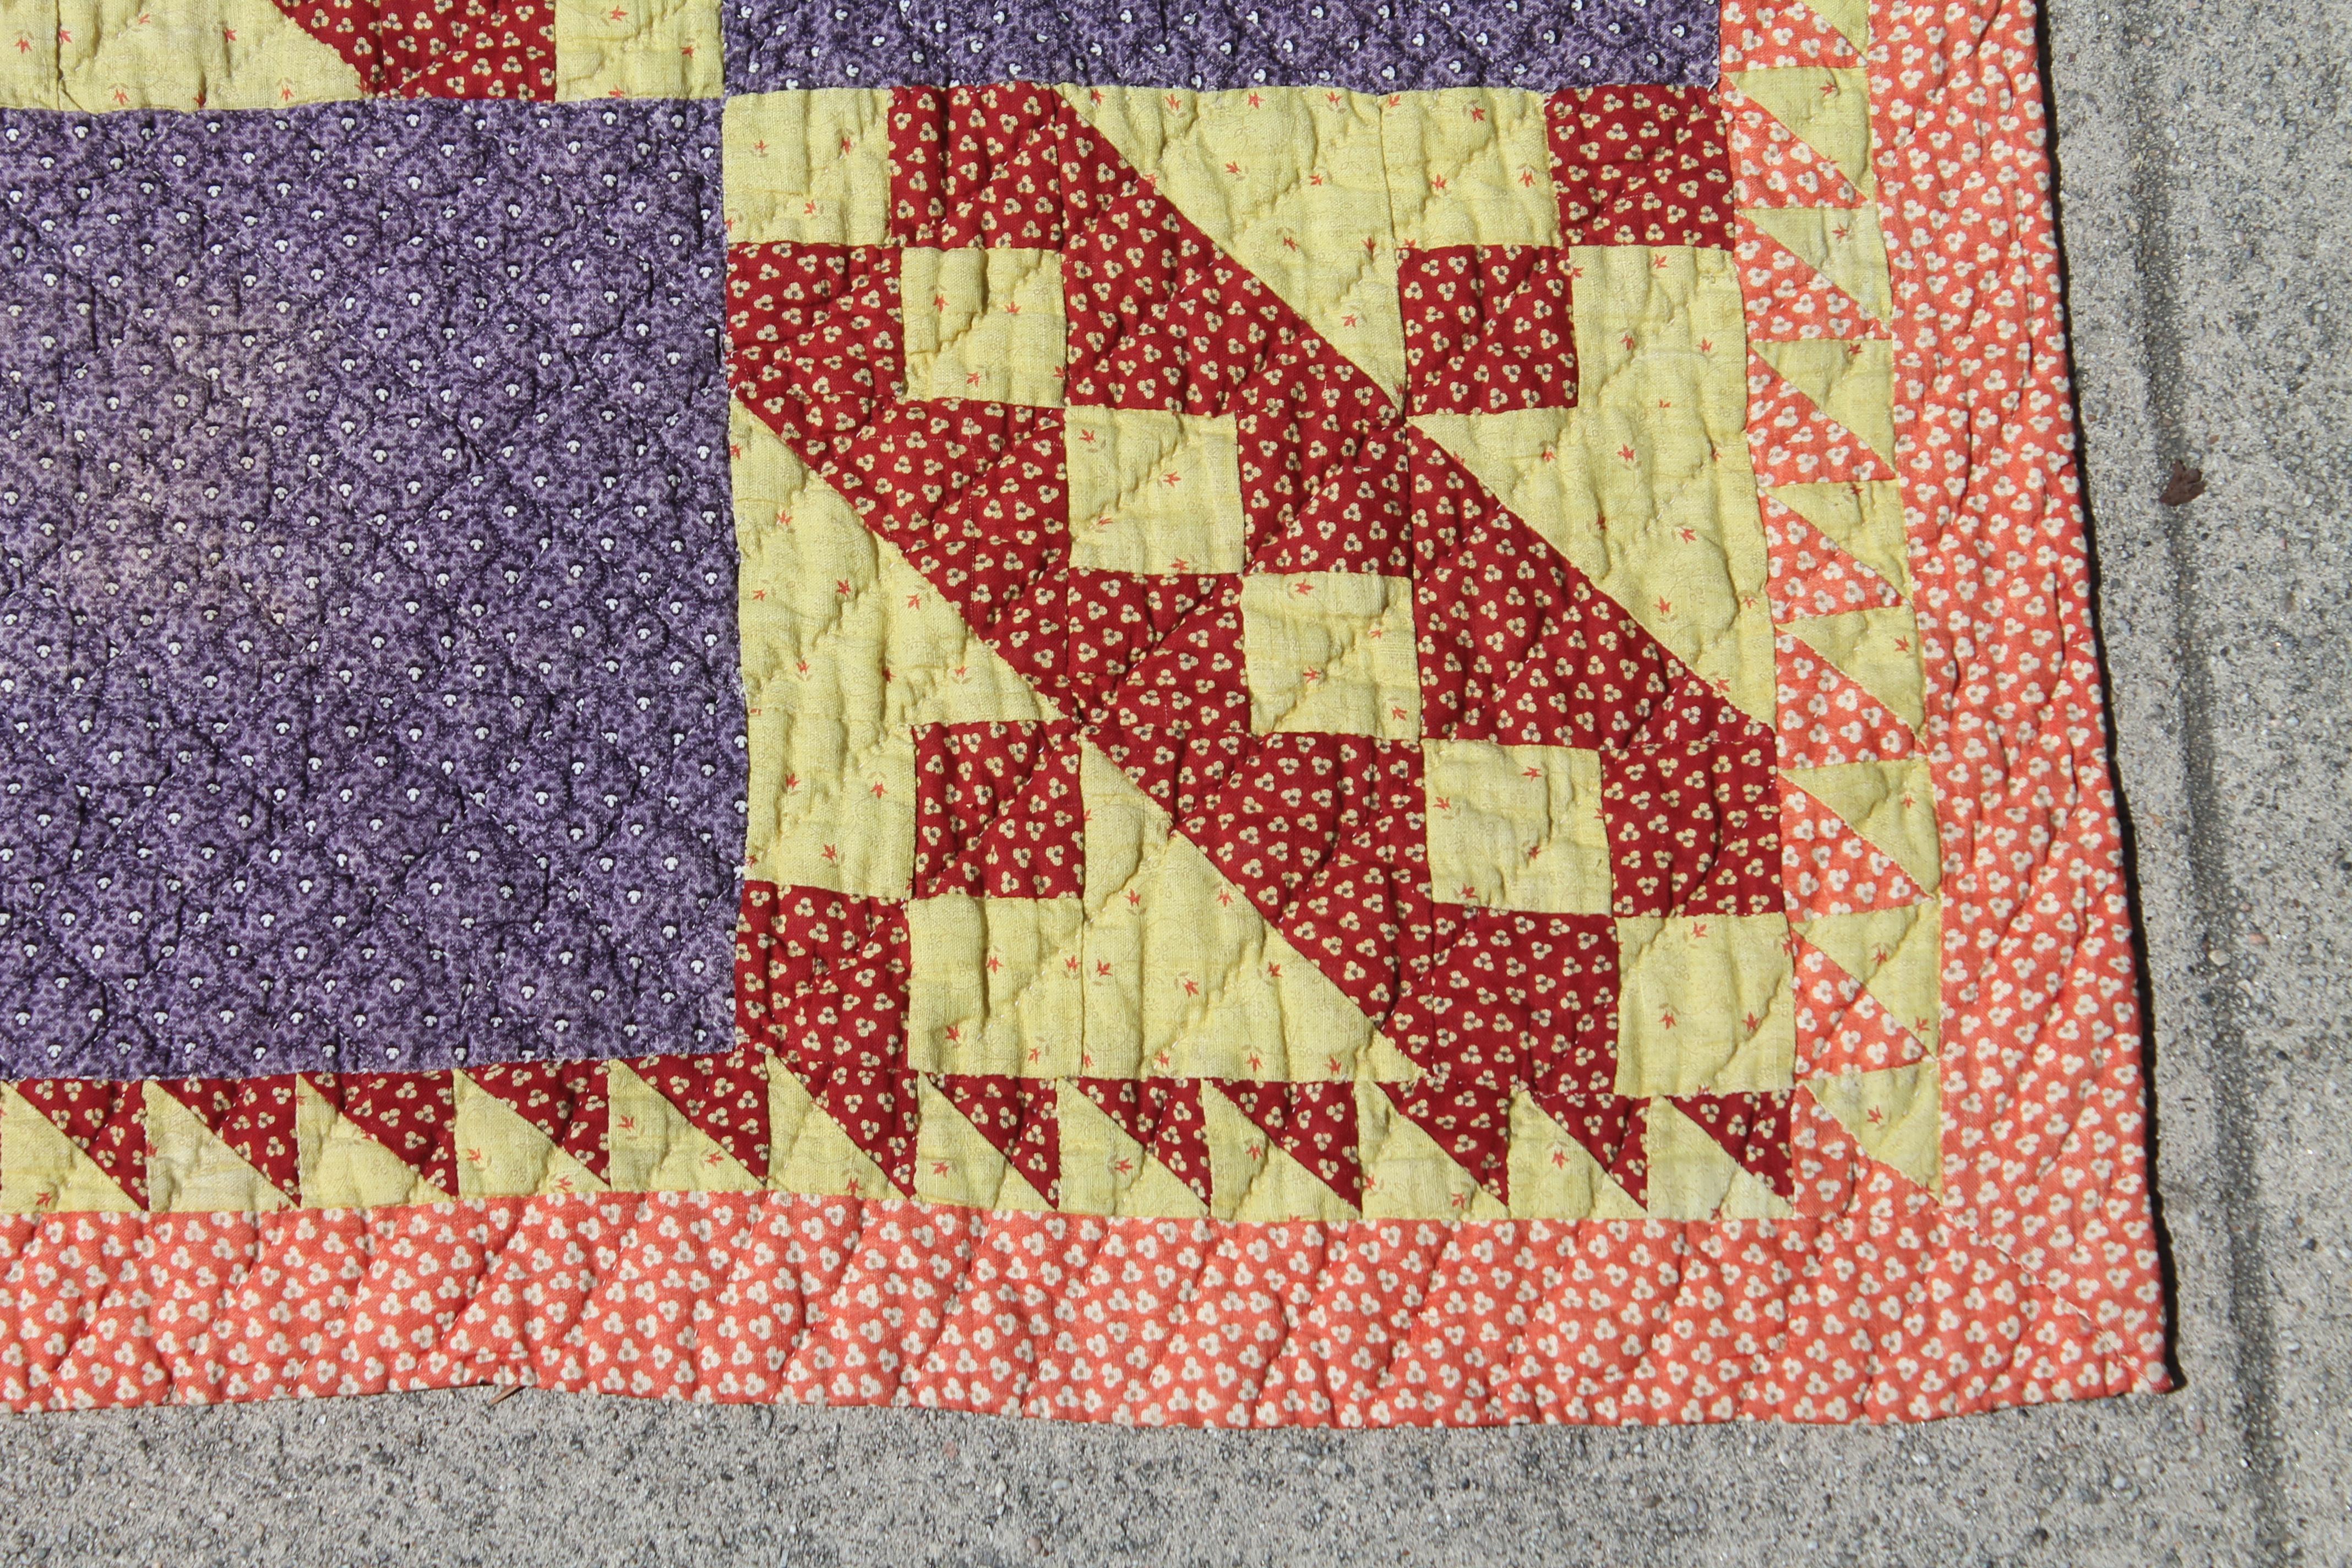 This finely pieced 19th century geometric crib quilt is in fine condition with minor fade throughout consistent from age and use. This quilt was found in Lancaster County, Pennsylvania from the 1880s.